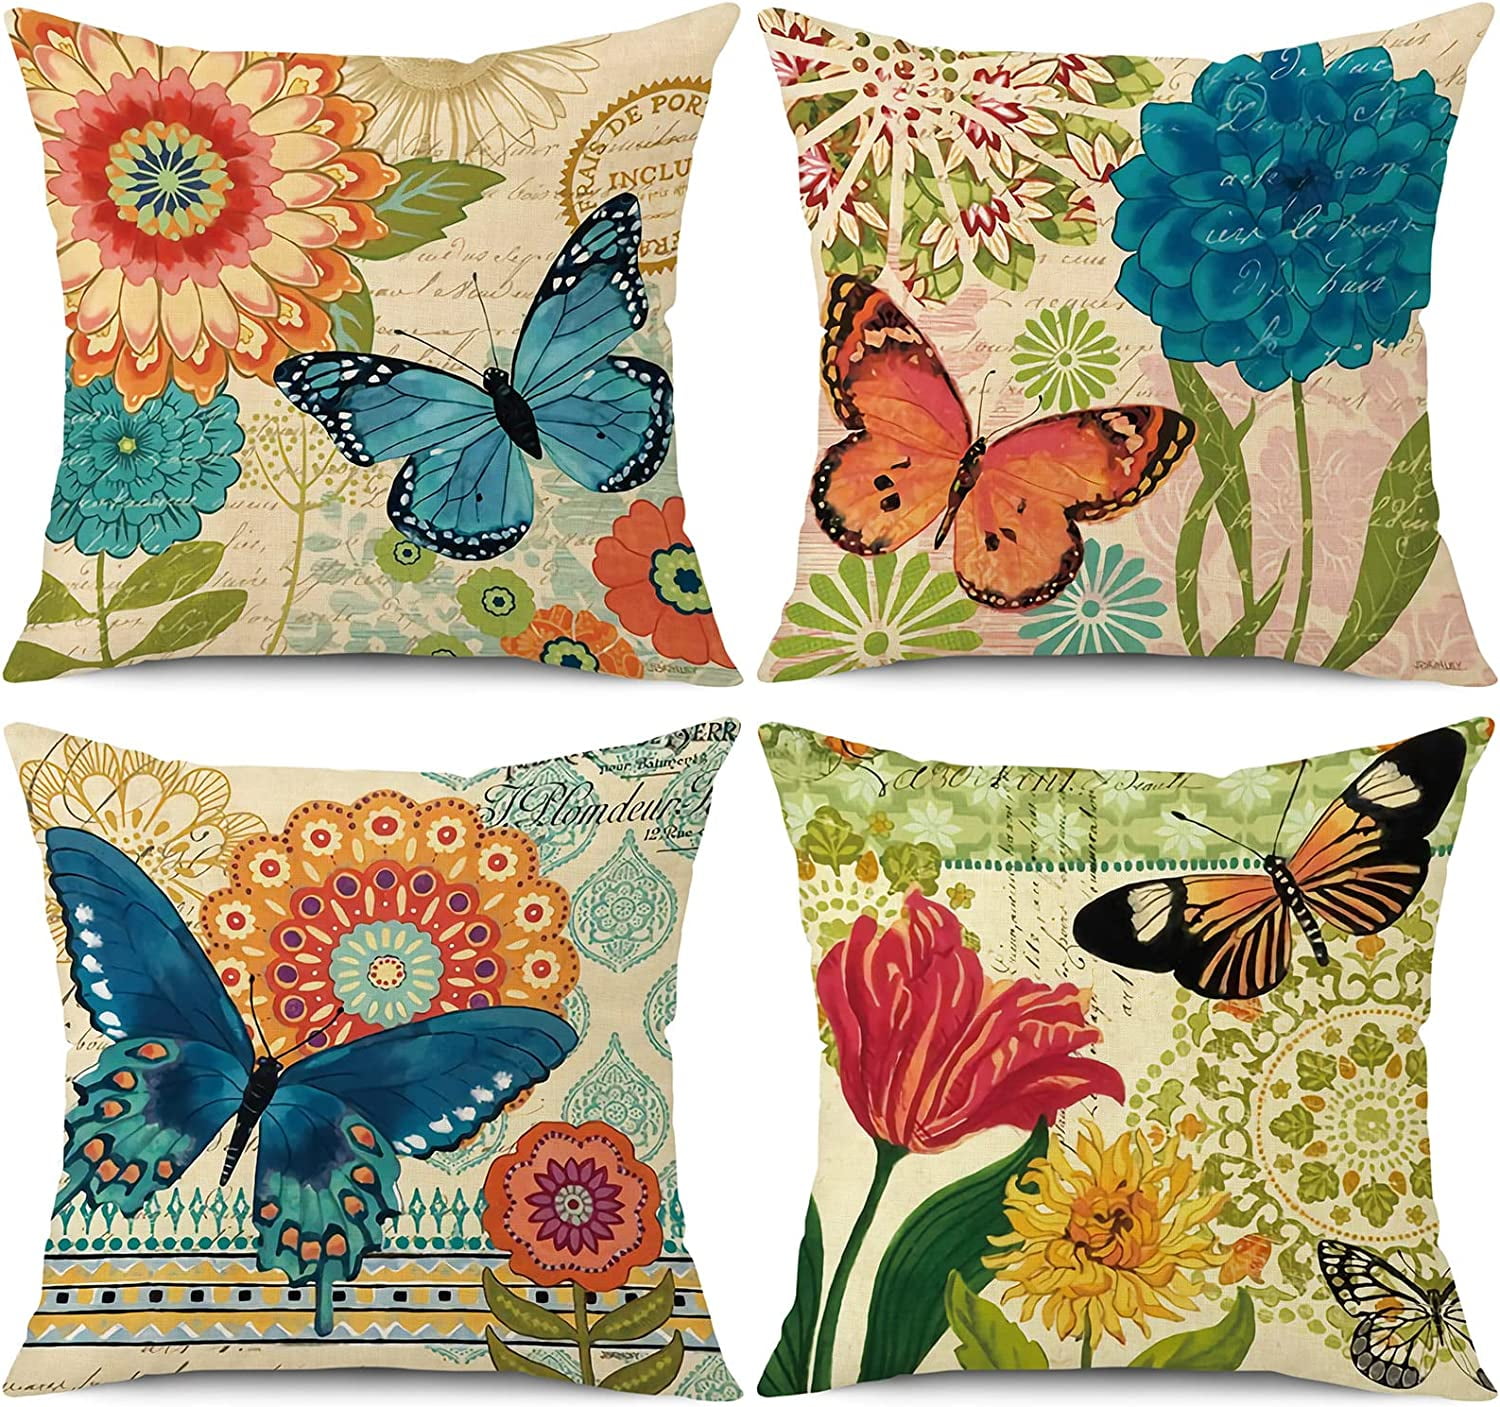 Faylapa 6 Pack Butterfly Leaf Floral Pillow Cases Boho Flowers Printed  Decorative Throw Cushion Cover Pillowcase for Home Sofa Car Decoration  18×18